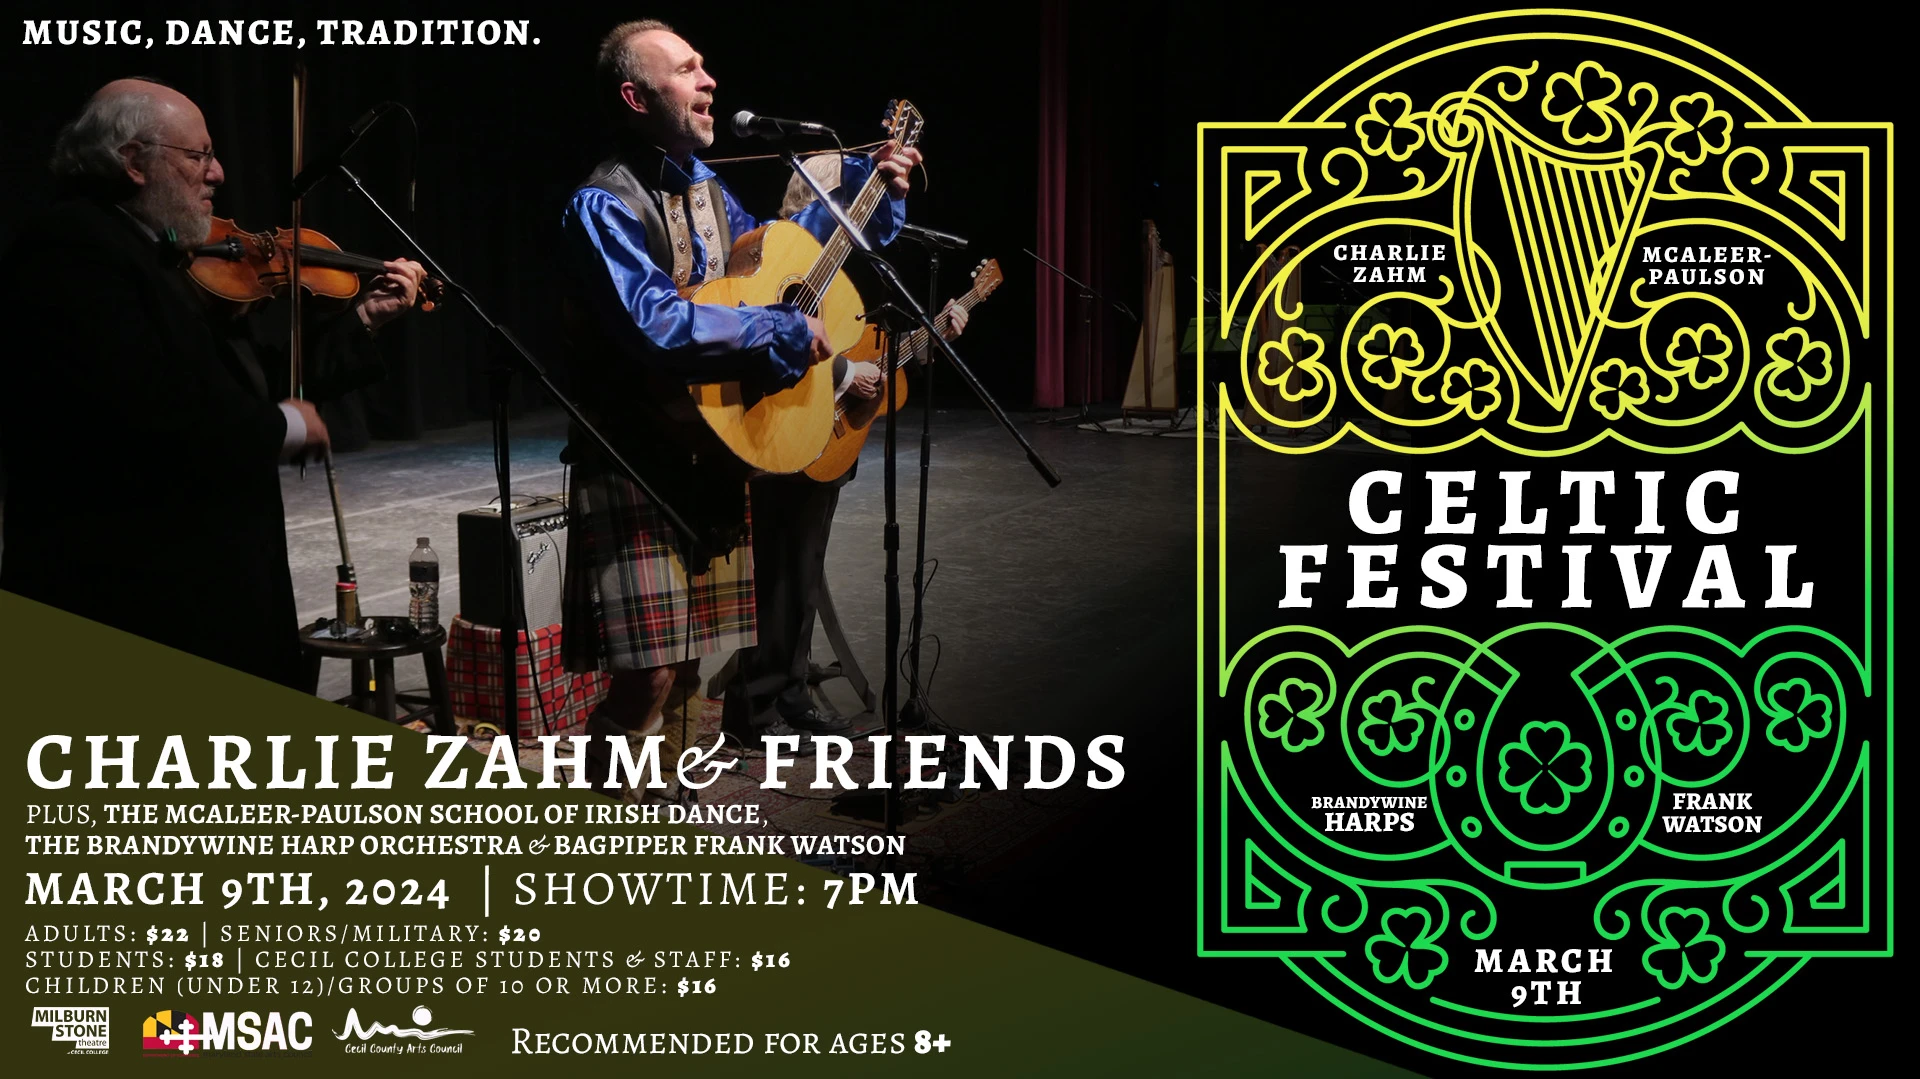 THE 2024 CELTIC FESTIVAL North East Chamber of Commerce